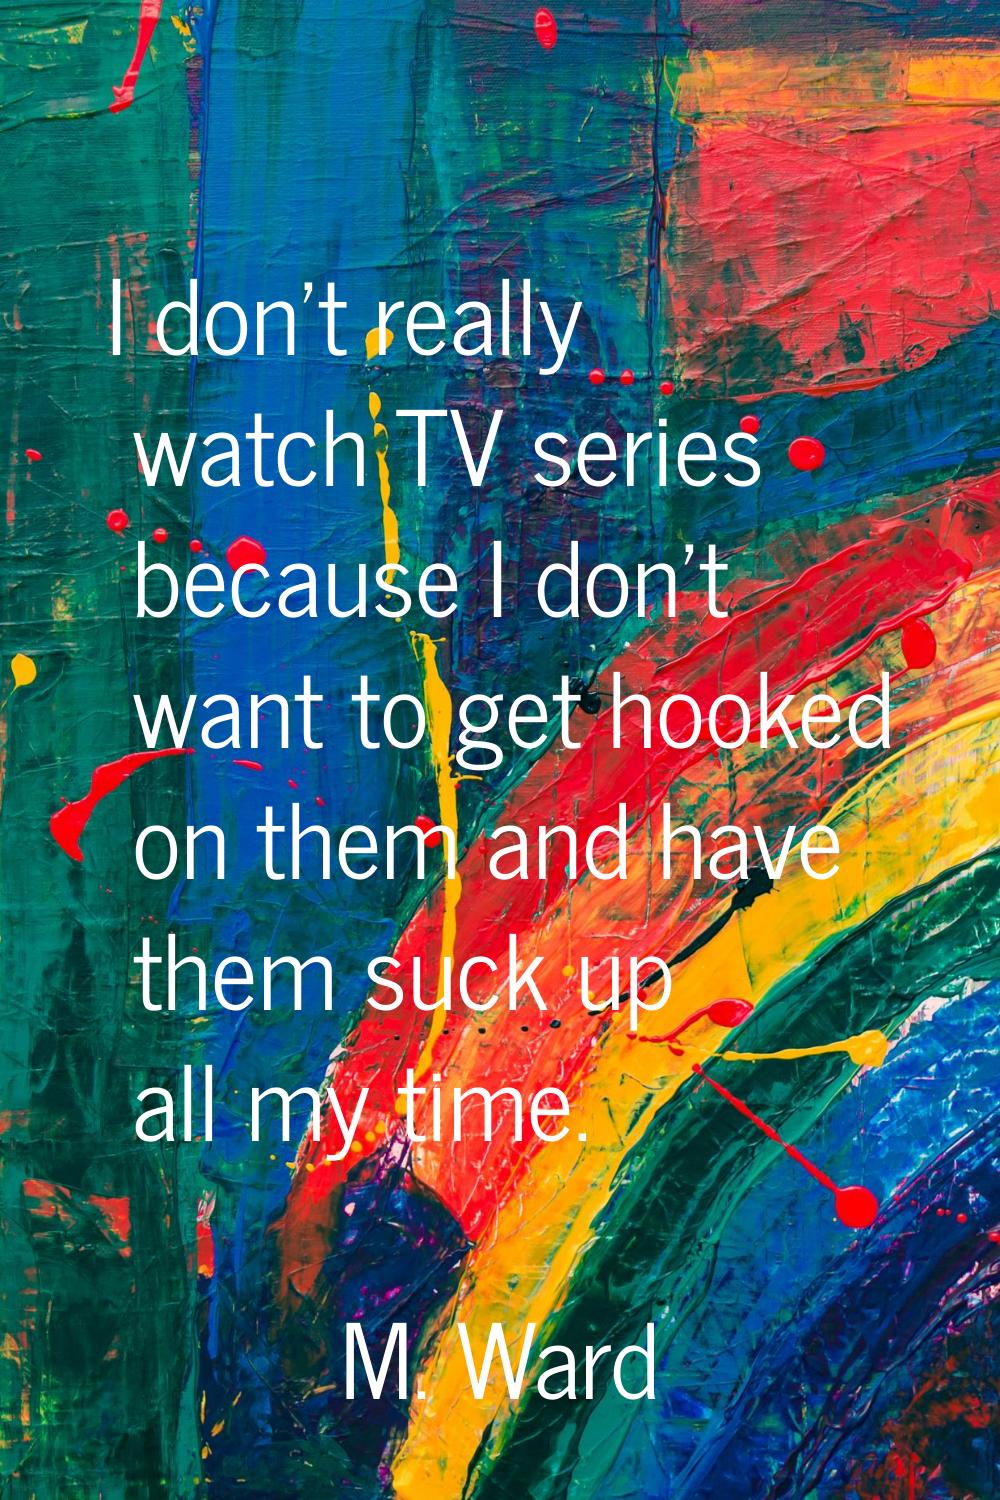 I don't really watch TV series because I don't want to get hooked on them and have them suck up all